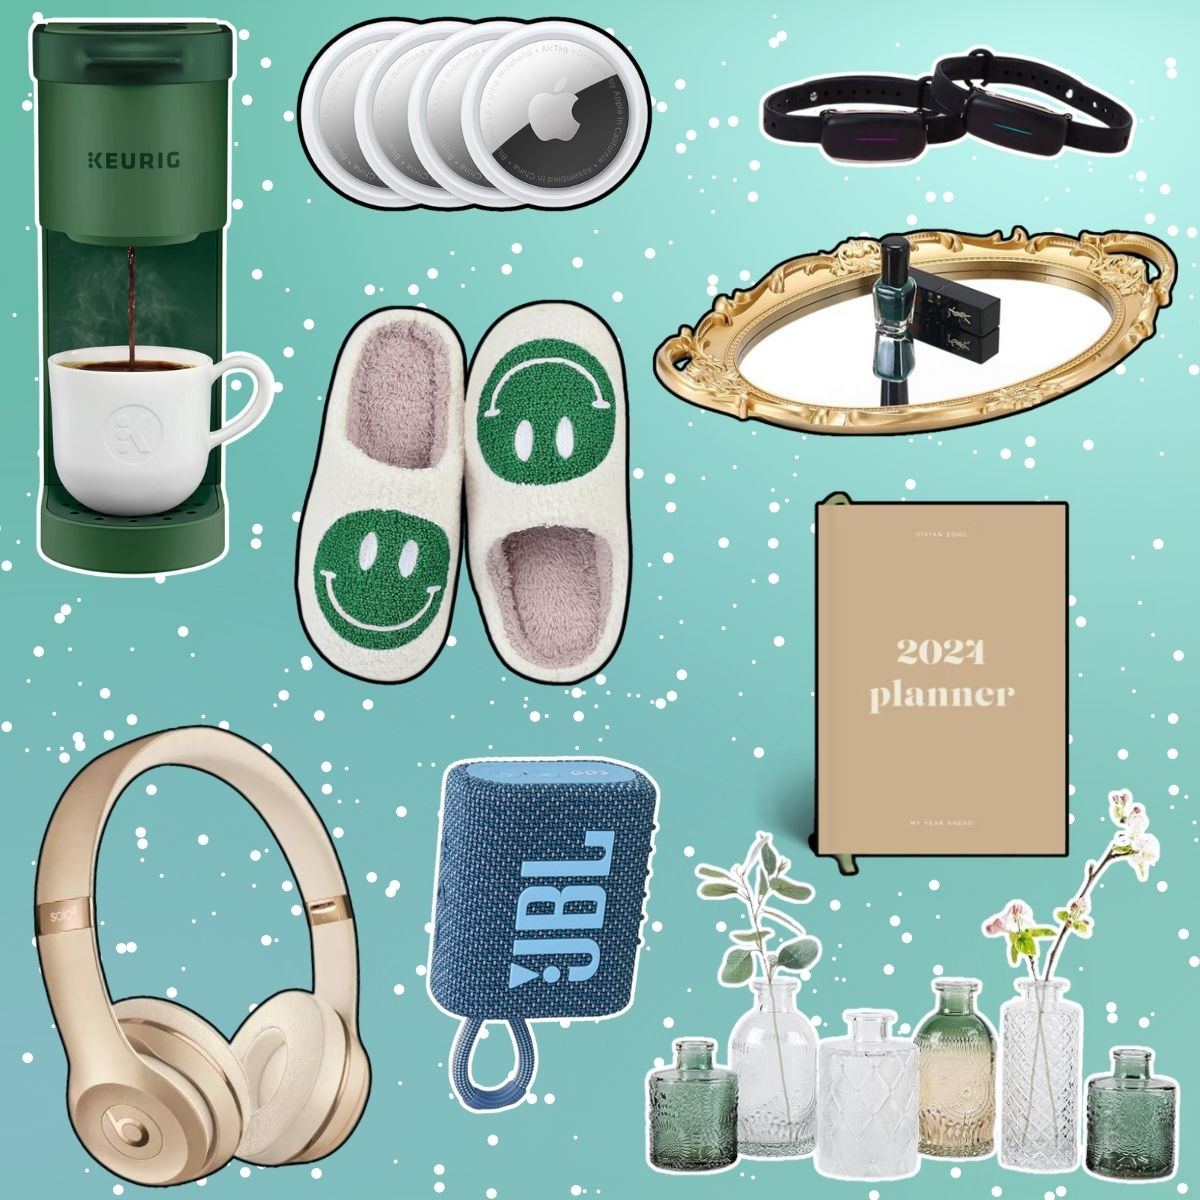 40 of the Best Gifts for Women Under $30 - College Fashion